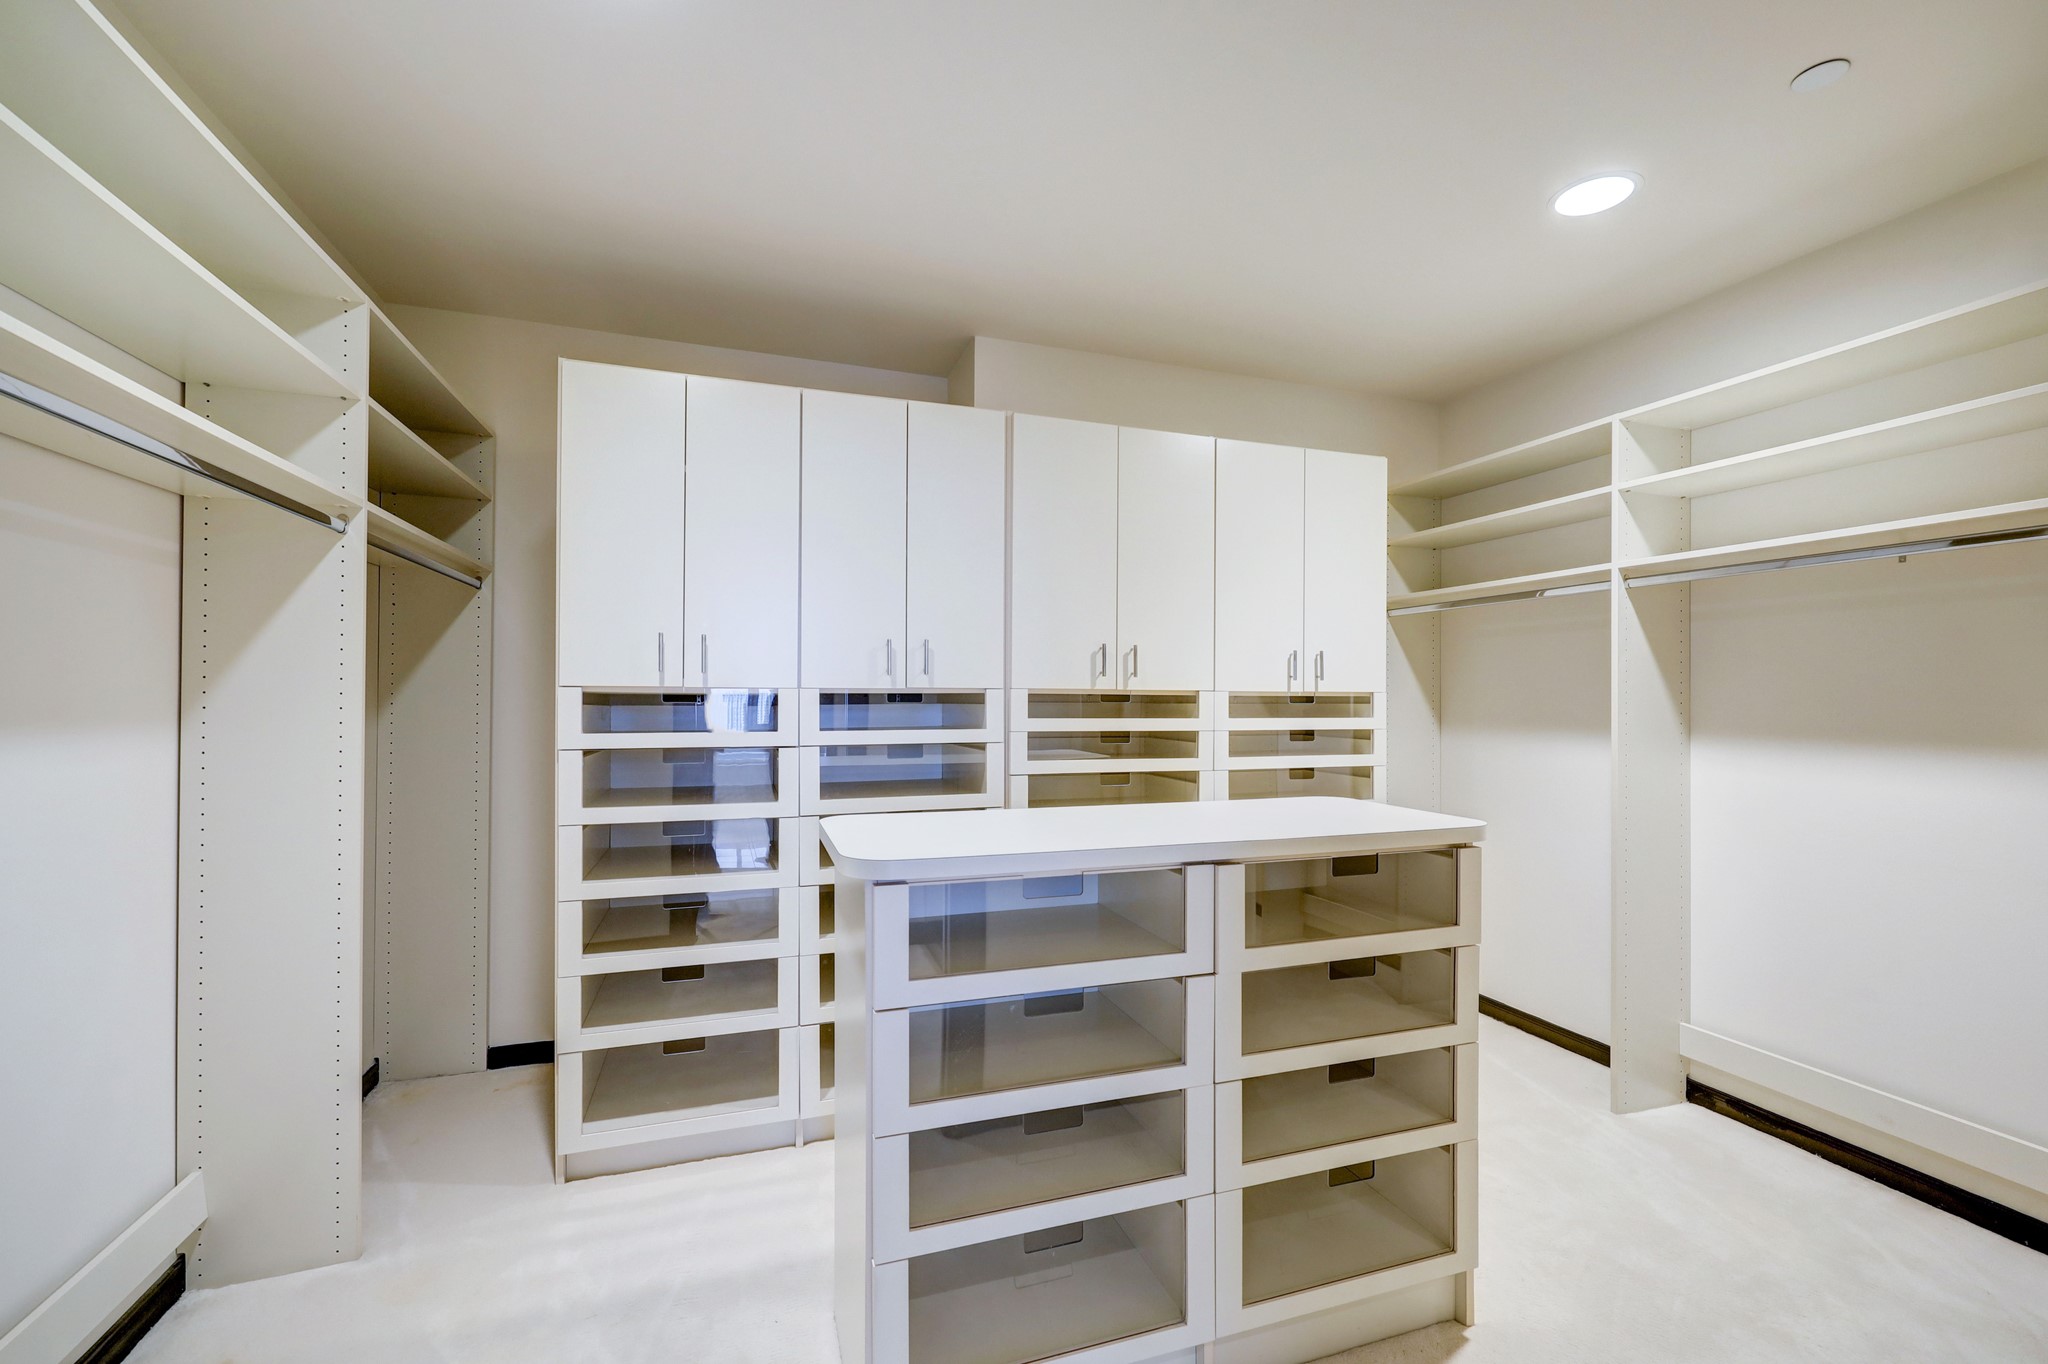 The Primary Walk-in Closet provides hanging and storage space for clothes and accessories of all types and sizes.